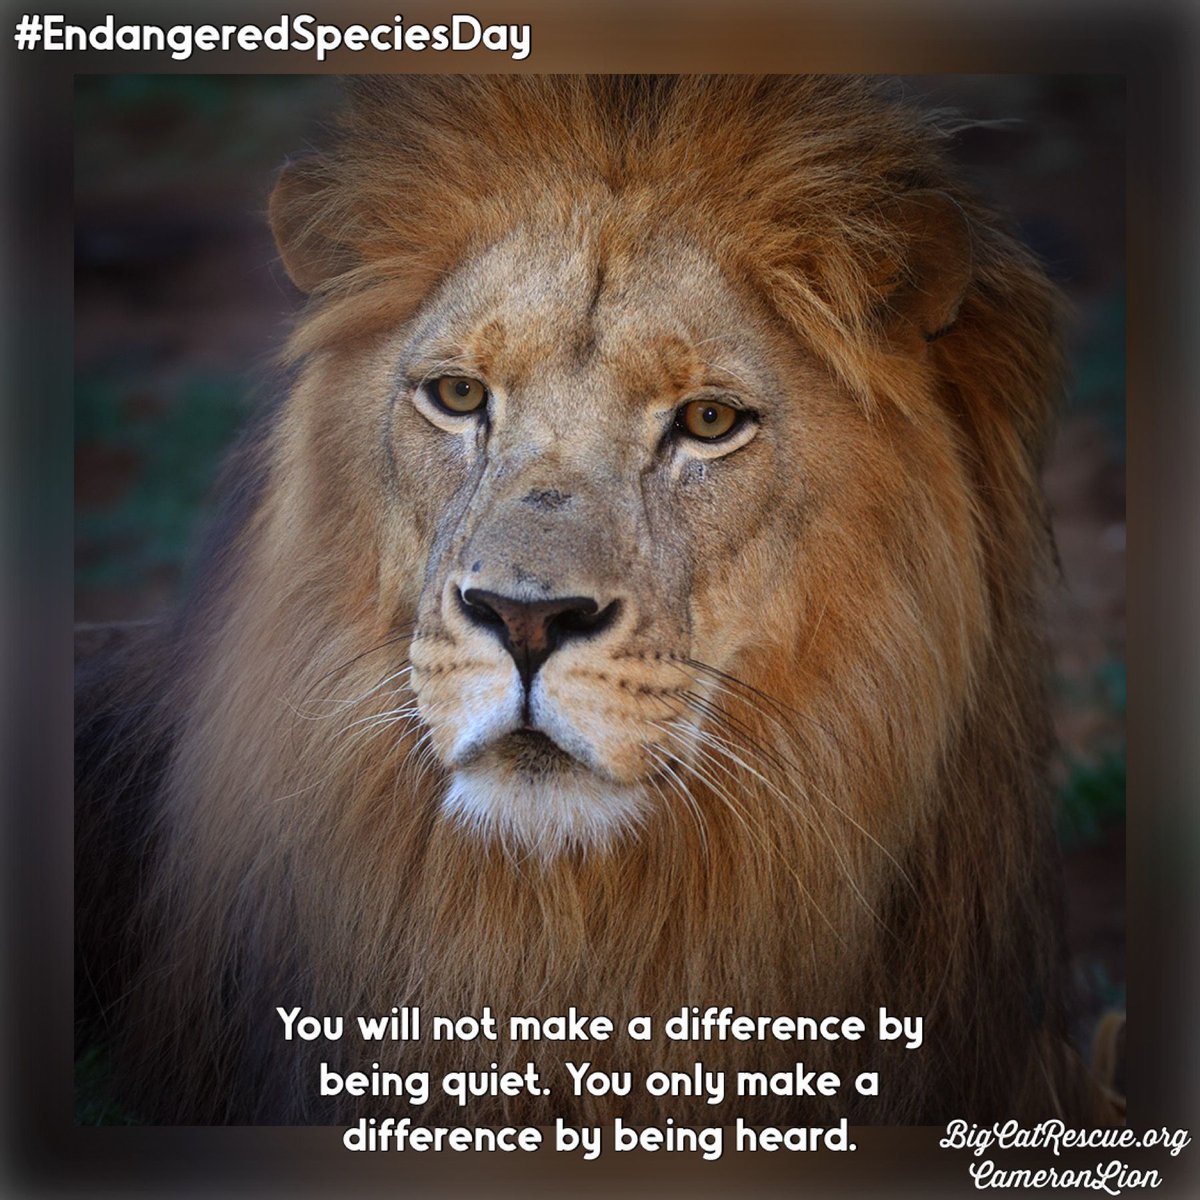 “You will not make a difference by being quiet. You only make a difference by being heard.”

#CameronLion #BigCatRescue #BigCats #Lions #MakeADifference #SpeakUp #Conservation #Wildlife #EndangeredSpeciesDay #SaveTheCats #SavingWildlife #CaroleBaskin